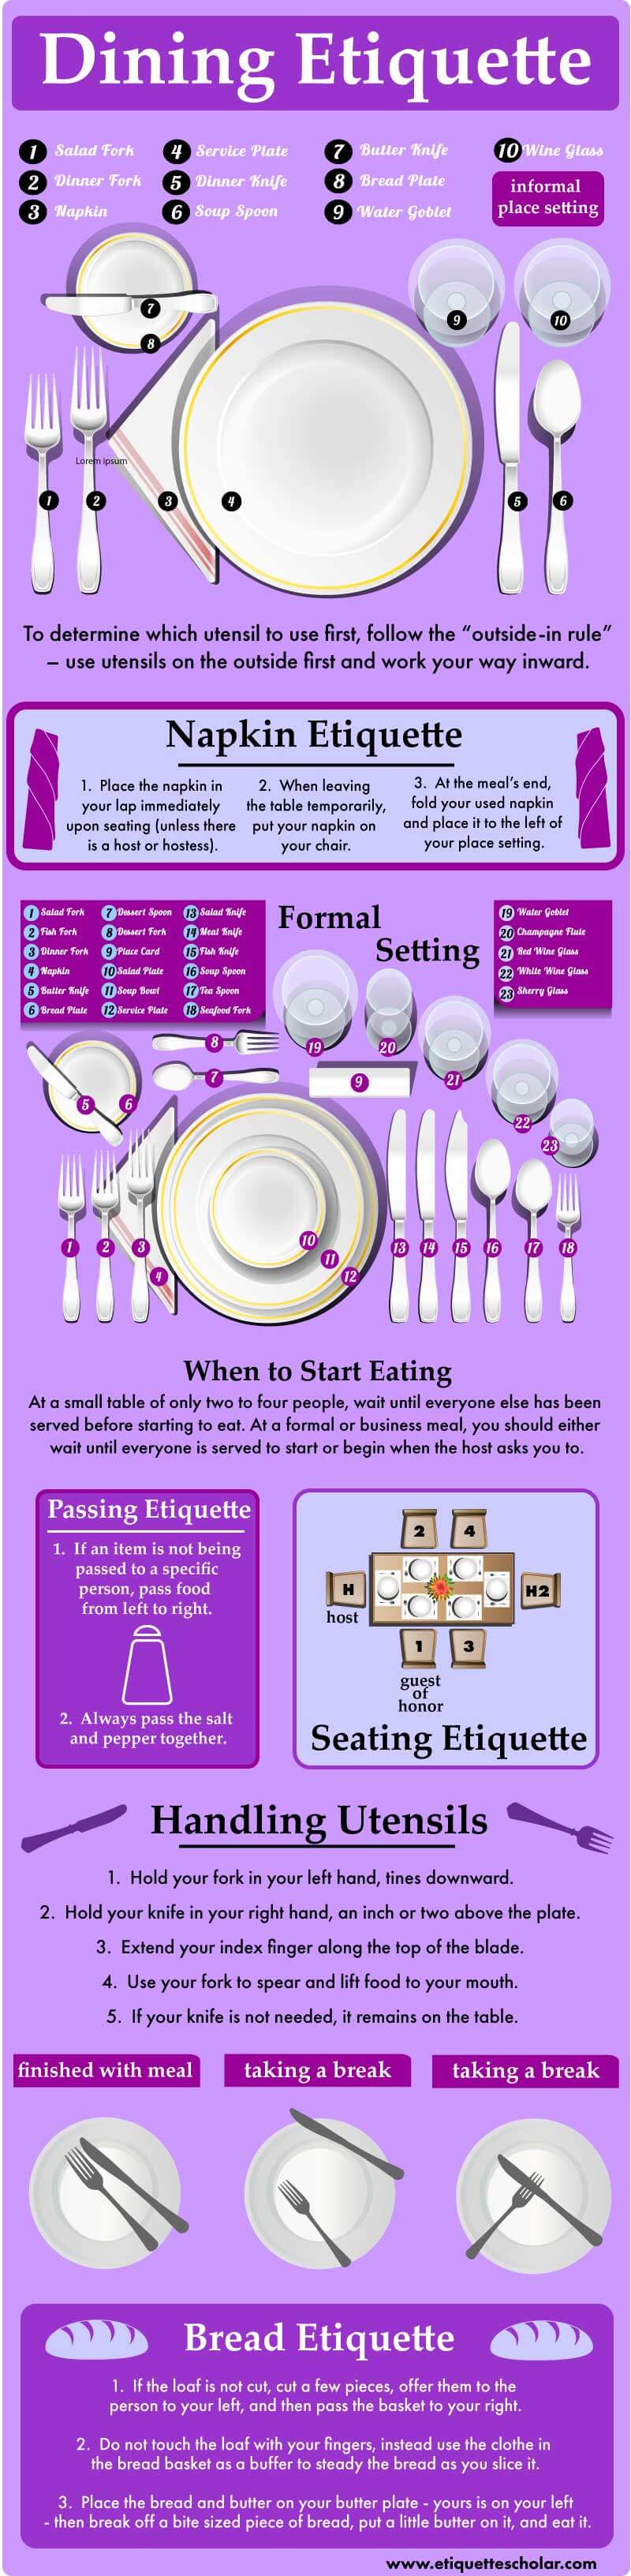 The Complete Dining Etiquette Guide!